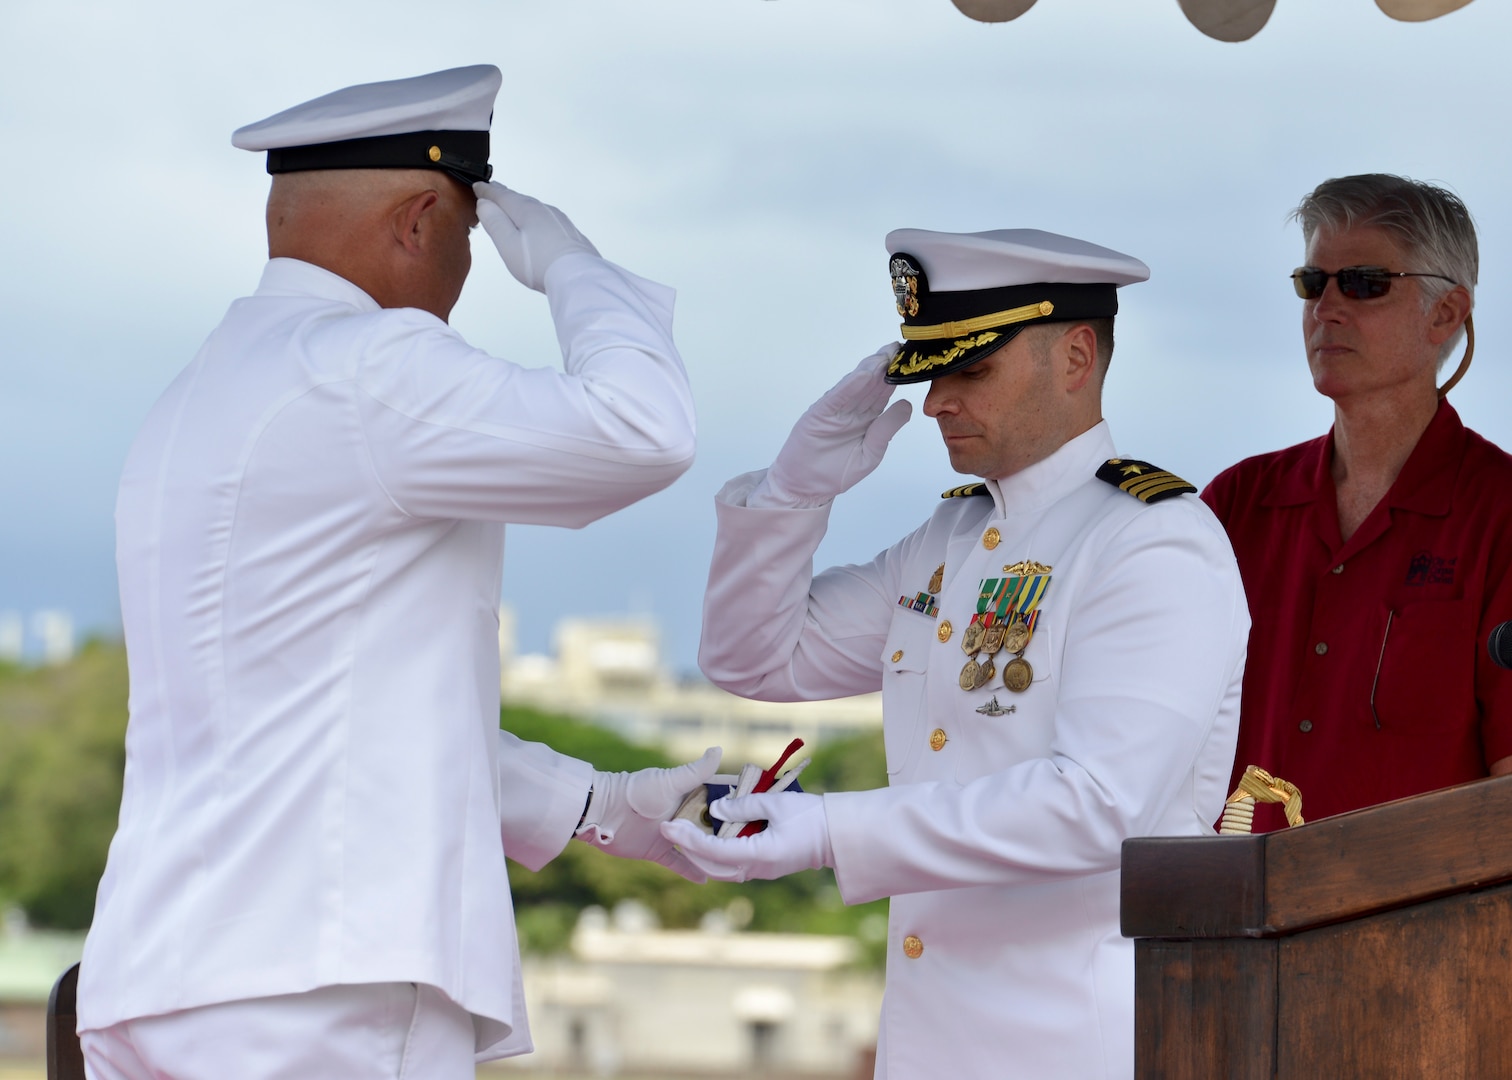 160530-N-LY160-424 JOINT BASE PEARL HARBOR-HICKAM, Hawaii (May 30, 2016) USS City of Corpus Christi’s (SSN 705) chief of the boat, Master Chief Machinist’s Mate Richard D. Magee, left, presents the ship’s commissioning pennant to Cmdr. Travis M. Petzoldt, commanding officer of the Los Angeles-class fast-attack submarine, during a Memorial Day decommissioning ceremony at Joint Base Pearl Harbor-Hickam. City of Corpus Christi concluded 33 years of service as the second U.S. warship to be named after Corpus Christi, Texas. (U.S. Navy photo by Mass Communication Specialist 2nd Class Michael H. Lee)